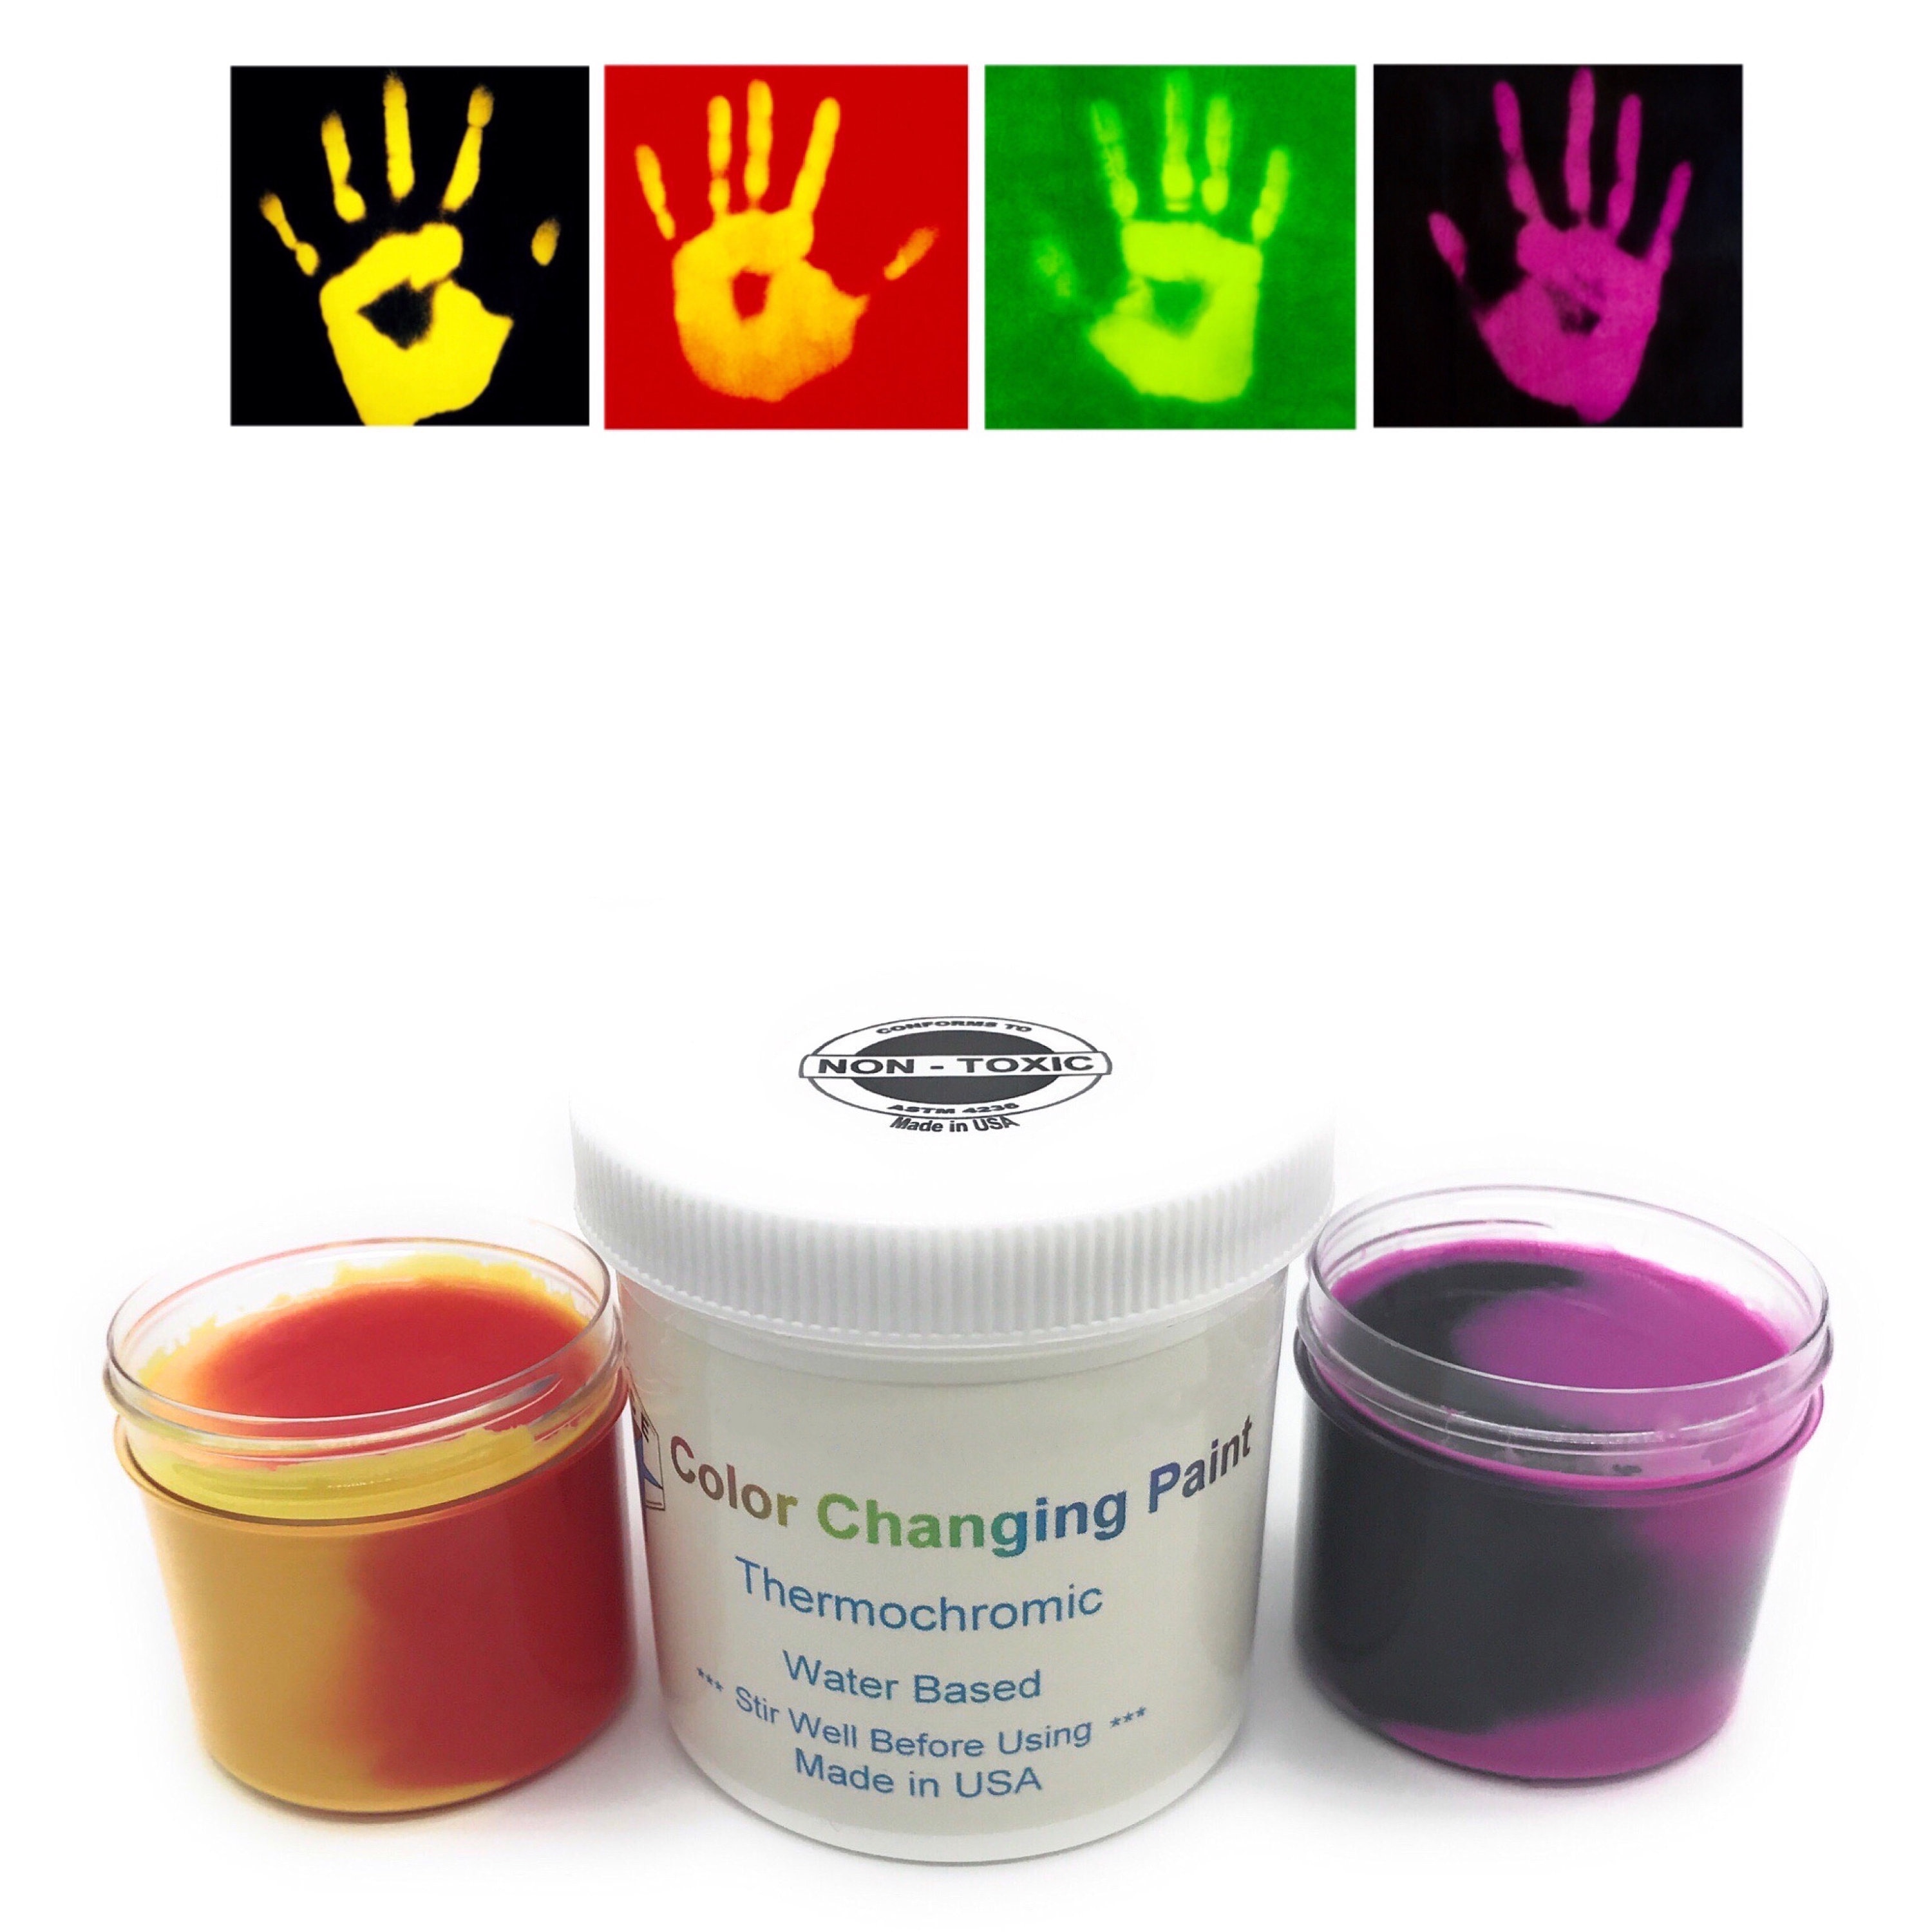 Thermochromic Color Changing Paint 